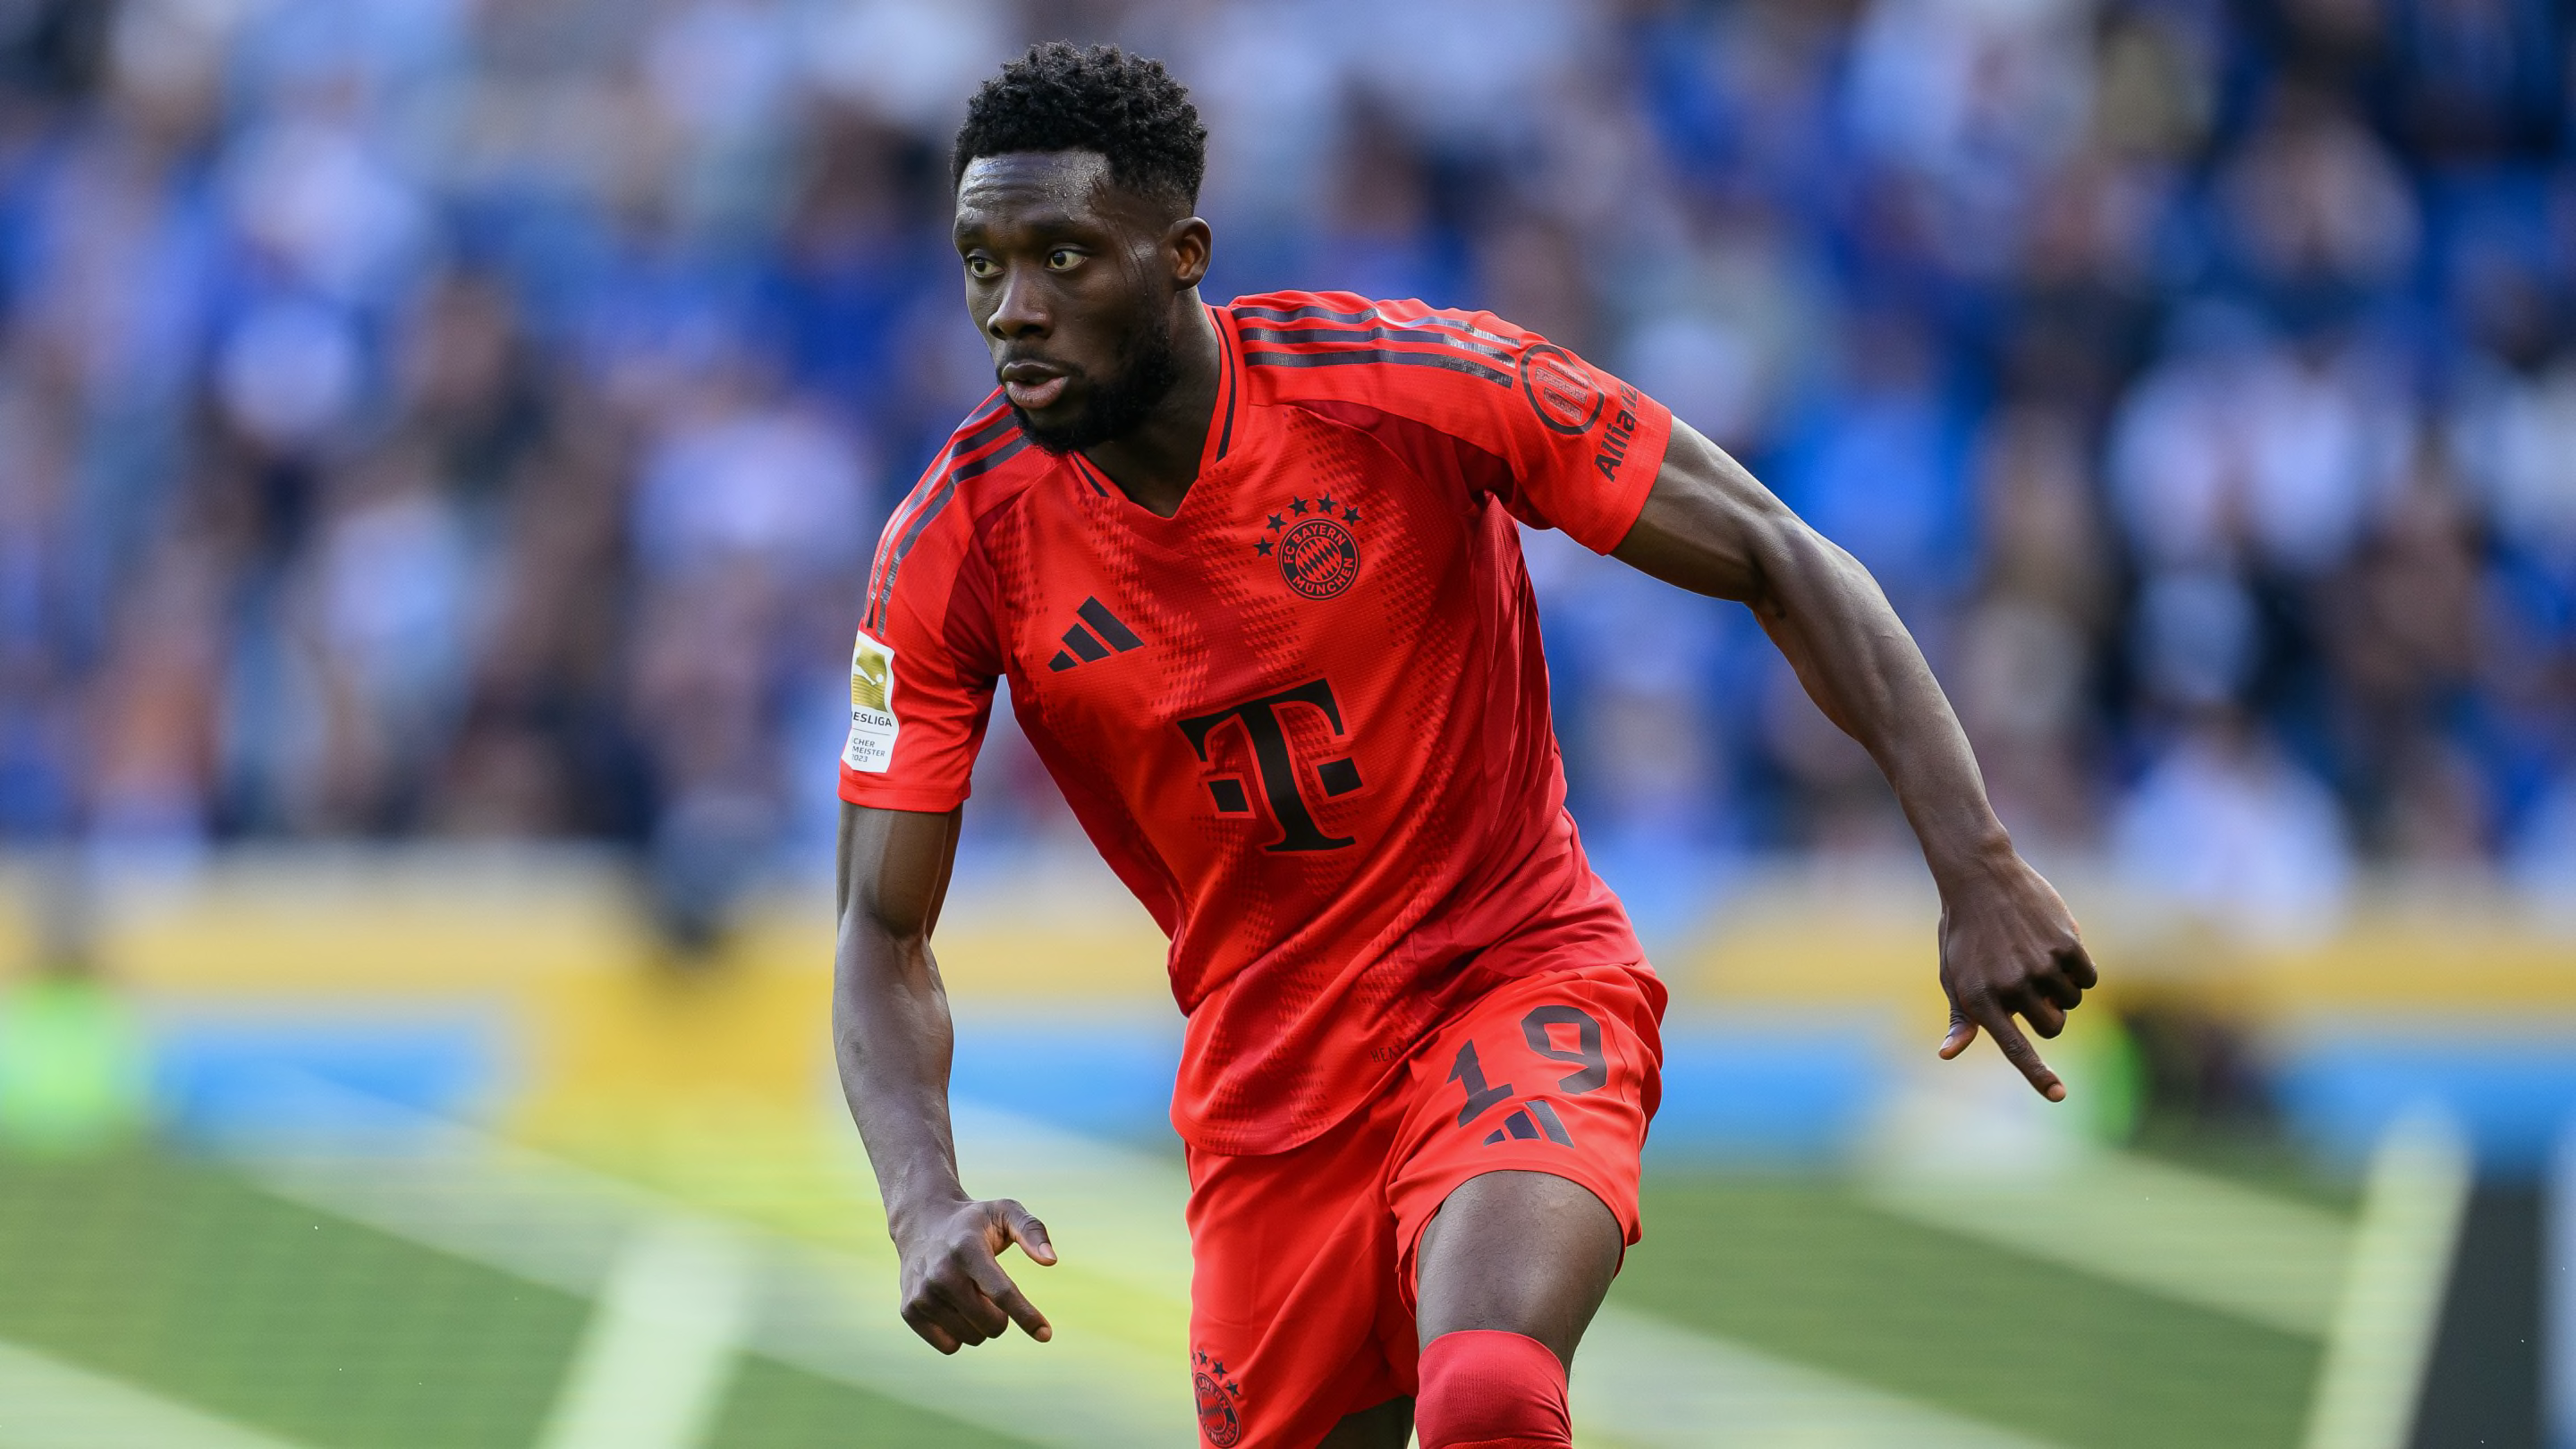 Real Madrid set new lower 'price limit' in Alphonso Davies pursuit